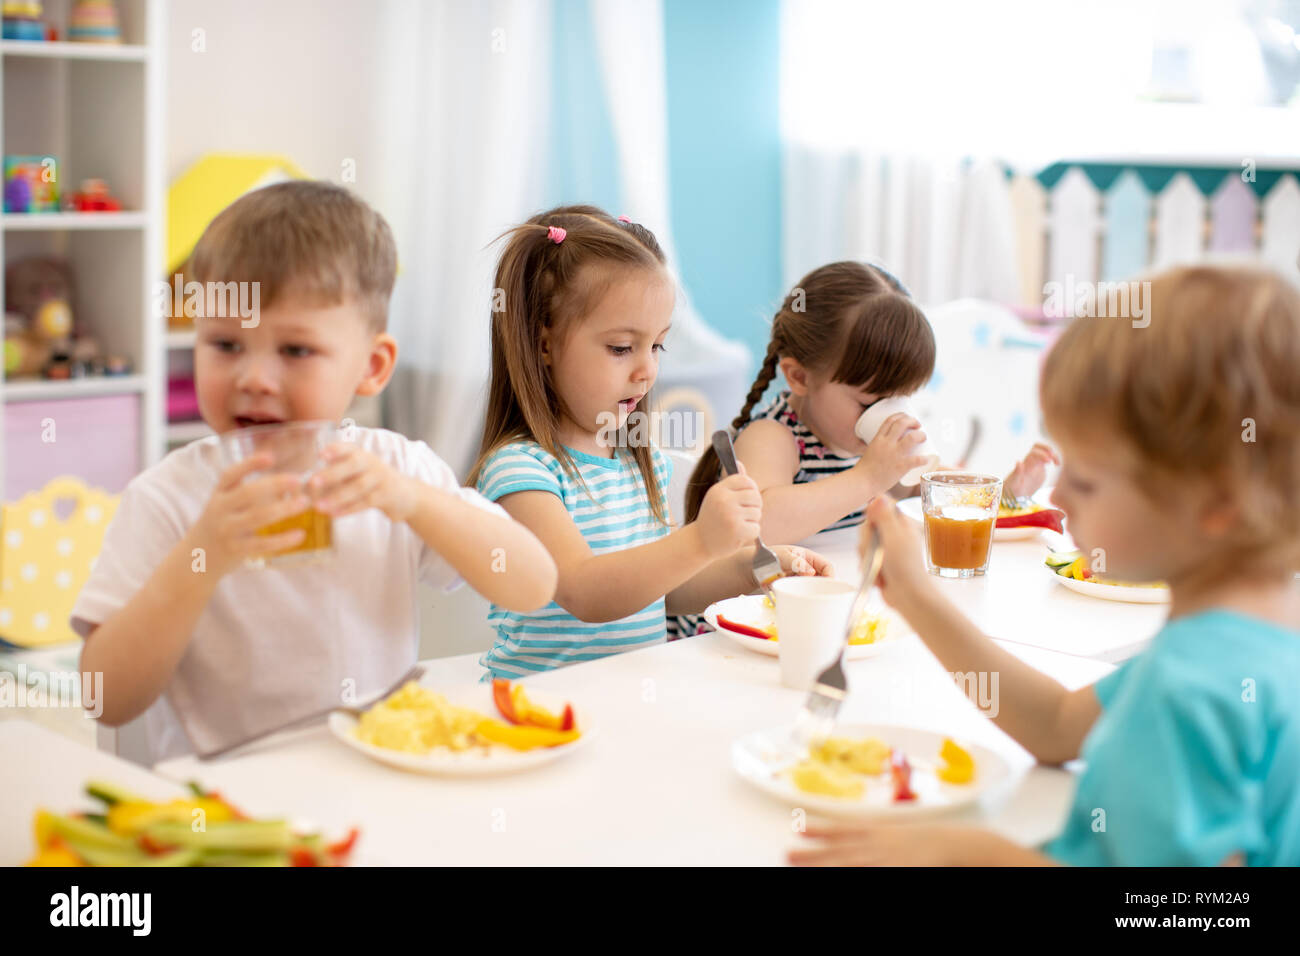 Children eating at the canteen Stock Photo by ©Wavebreakmedia 108970516